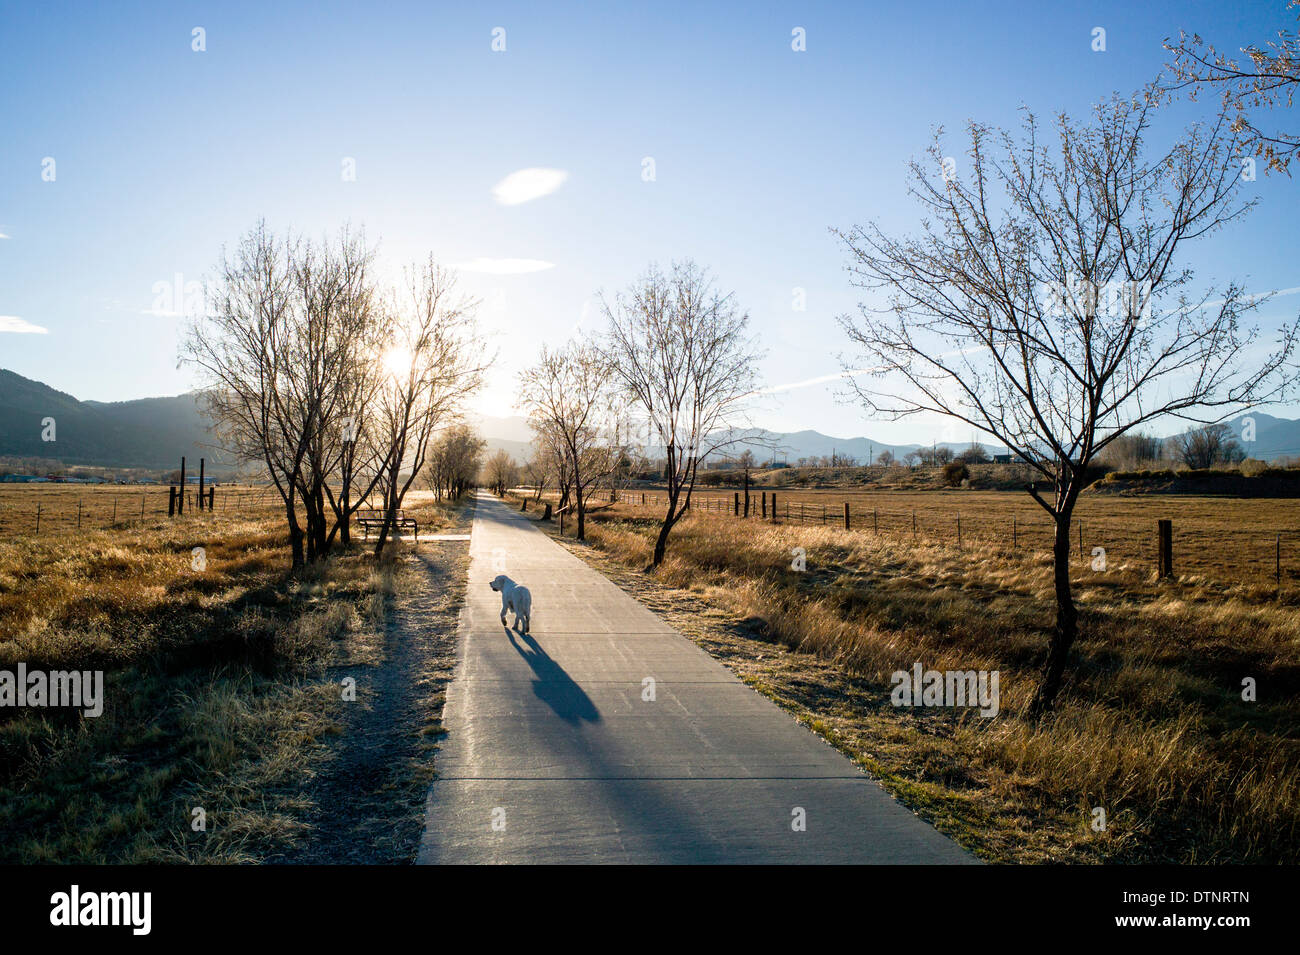 Six month old platinum golden retriever dog on bike path at sunset, small mountain town of Salida, Colorado, USA Stock Photo